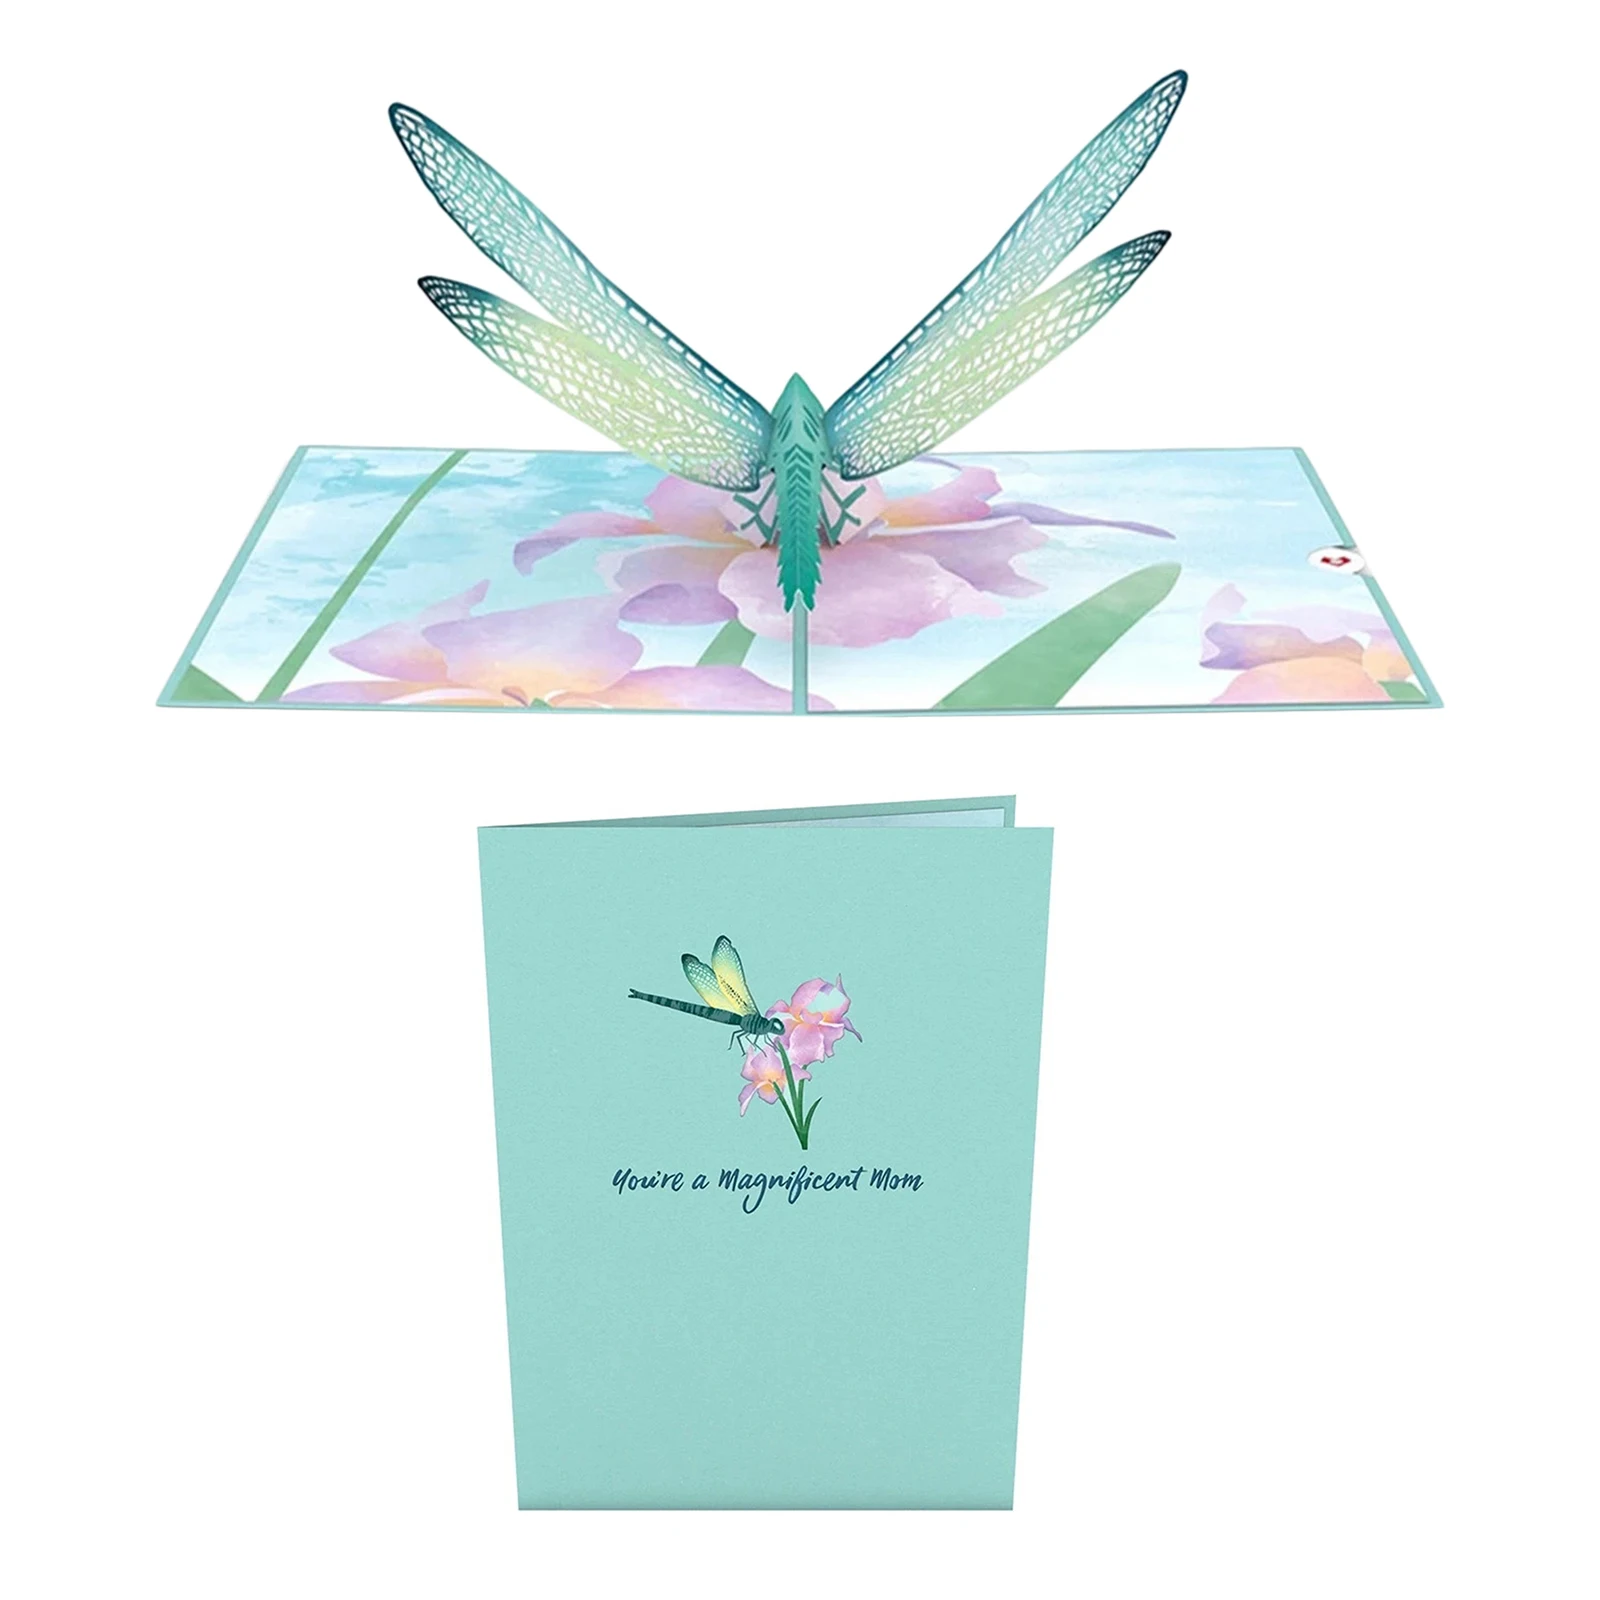 Dragonfly Pop Up Card Valentine's Day Gifts for Grandma Invitation Postcard